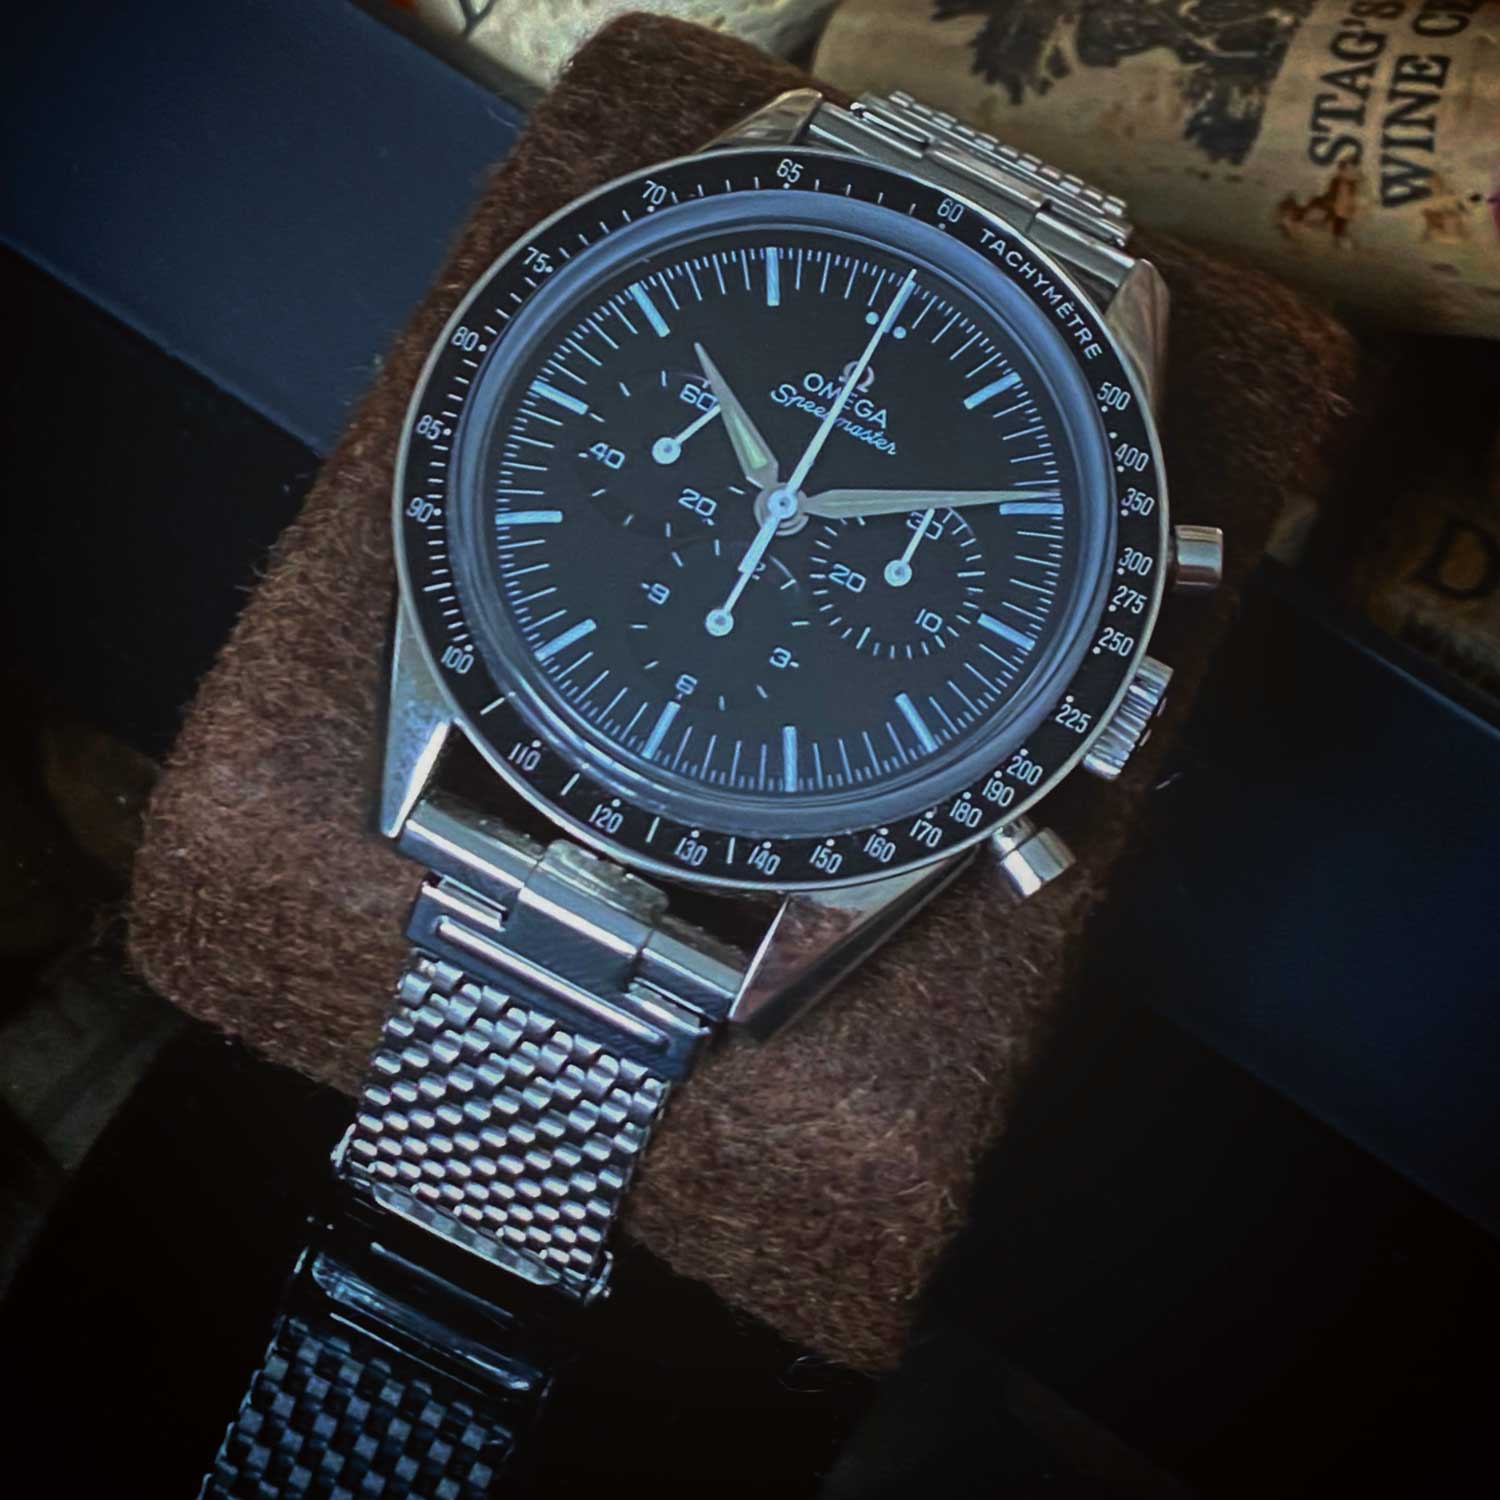 Collectors like Samuel (@noble_precision) are increasingly fitting their Speedy on the Forstner strap.